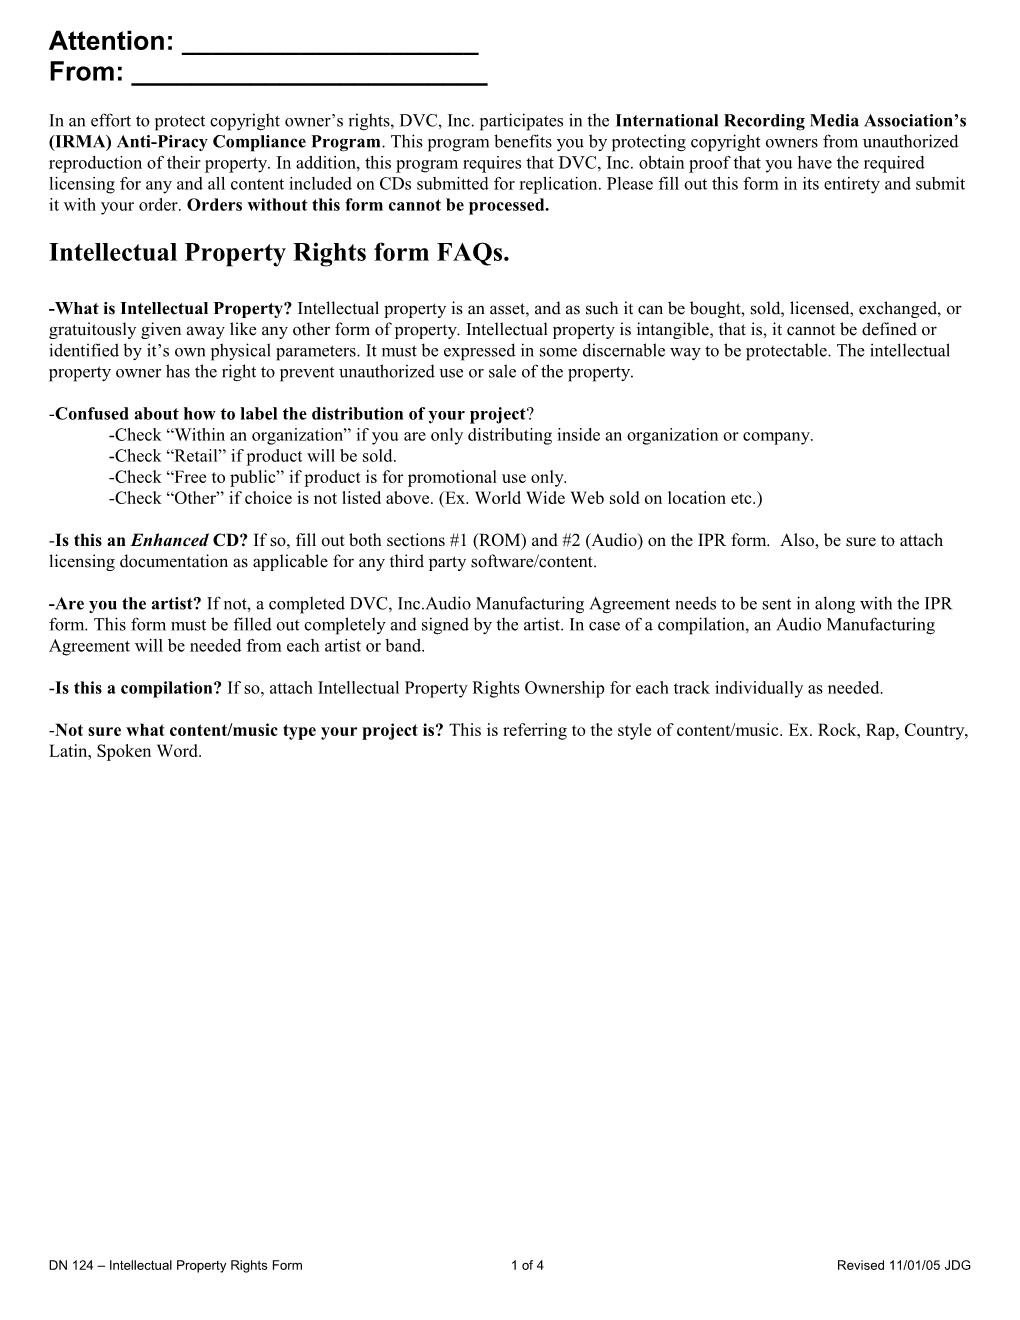 Intellectual Property Rights Form Faqs